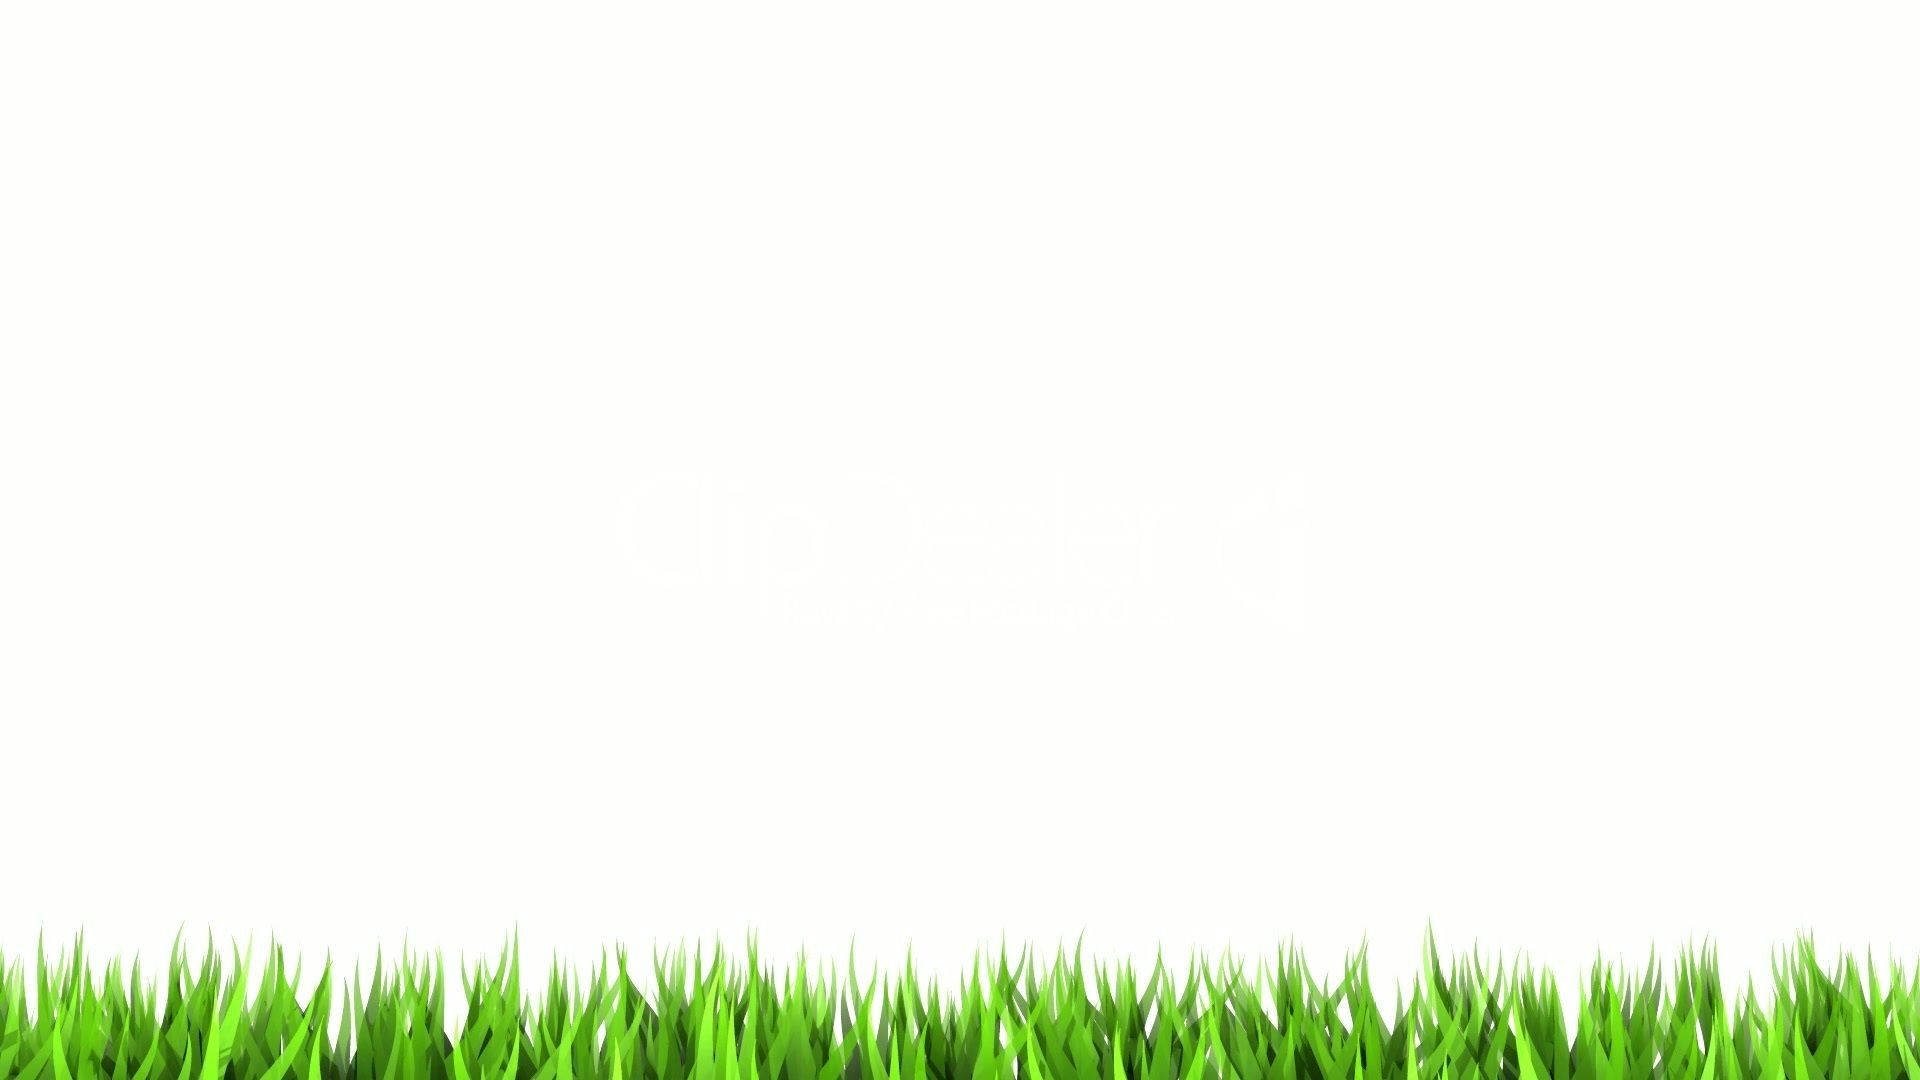 Blank White With Grass Picture